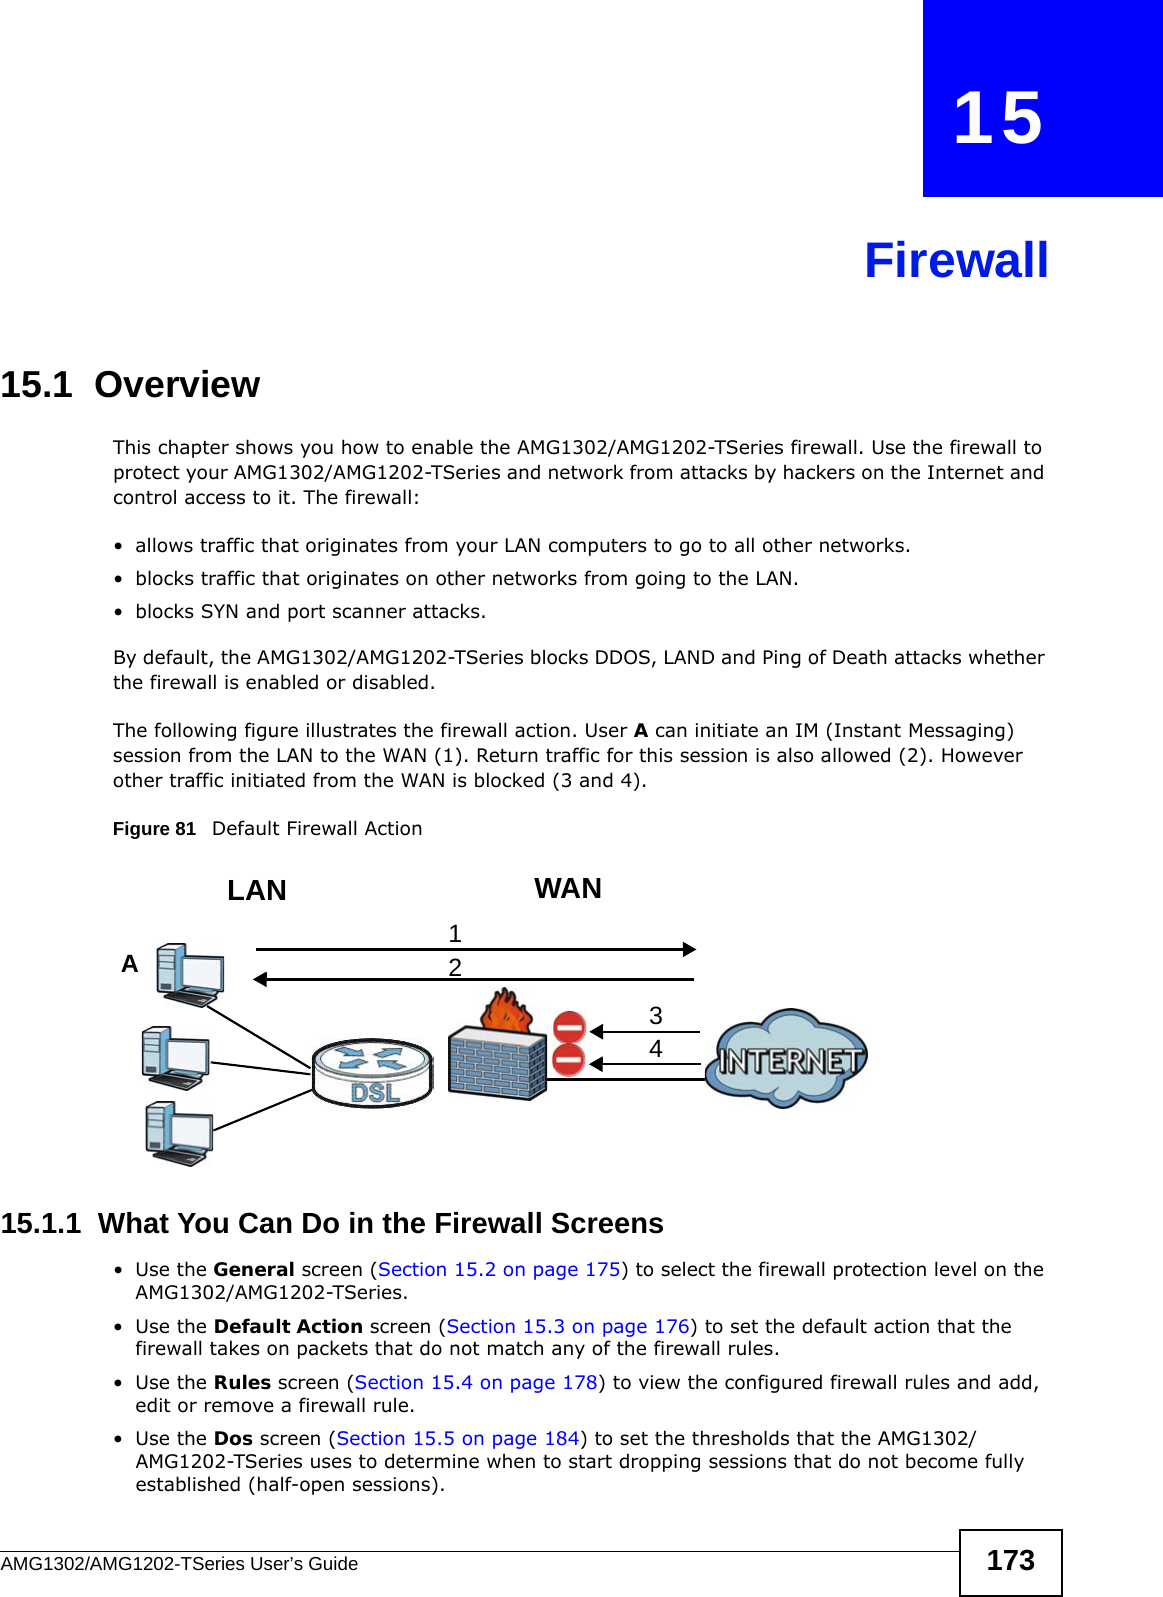 AMG1302/AMG1202-TSeries User’s Guide 173CHAPTER   15Firewall15.1  OverviewThis chapter shows you how to enable the AMG1302/AMG1202-TSeries firewall. Use the firewall to protect your AMG1302/AMG1202-TSeries and network from attacks by hackers on the Internet and control access to it. The firewall:• allows traffic that originates from your LAN computers to go to all other networks. • blocks traffic that originates on other networks from going to the LAN.• blocks SYN and port scanner attacks.By default, the AMG1302/AMG1202-TSeries blocks DDOS, LAND and Ping of Death attacks whether the firewall is enabled or disabled.The following figure illustrates the firewall action. User A can initiate an IM (Instant Messaging) session from the LAN to the WAN (1). Return traffic for this session is also allowed (2). However other traffic initiated from the WAN is blocked (3 and 4).Figure 81   Default Firewall Action15.1.1  What You Can Do in the Firewall Screens•Use the General screen (Section 15.2 on page 175) to select the firewall protection level on the AMG1302/AMG1202-TSeries.•Use the Default Action screen (Section 15.3 on page 176) to set the default action that the firewall takes on packets that do not match any of the firewall rules.•Use the Rules screen (Section 15.4 on page 178) to view the configured firewall rules and add, edit or remove a firewall rule.•Use the Dos screen (Section 15.5 on page 184) to set the thresholds that the AMG1302/AMG1202-TSeries uses to determine when to start dropping sessions that do not become fully established (half-open sessions).WANLAN3412A